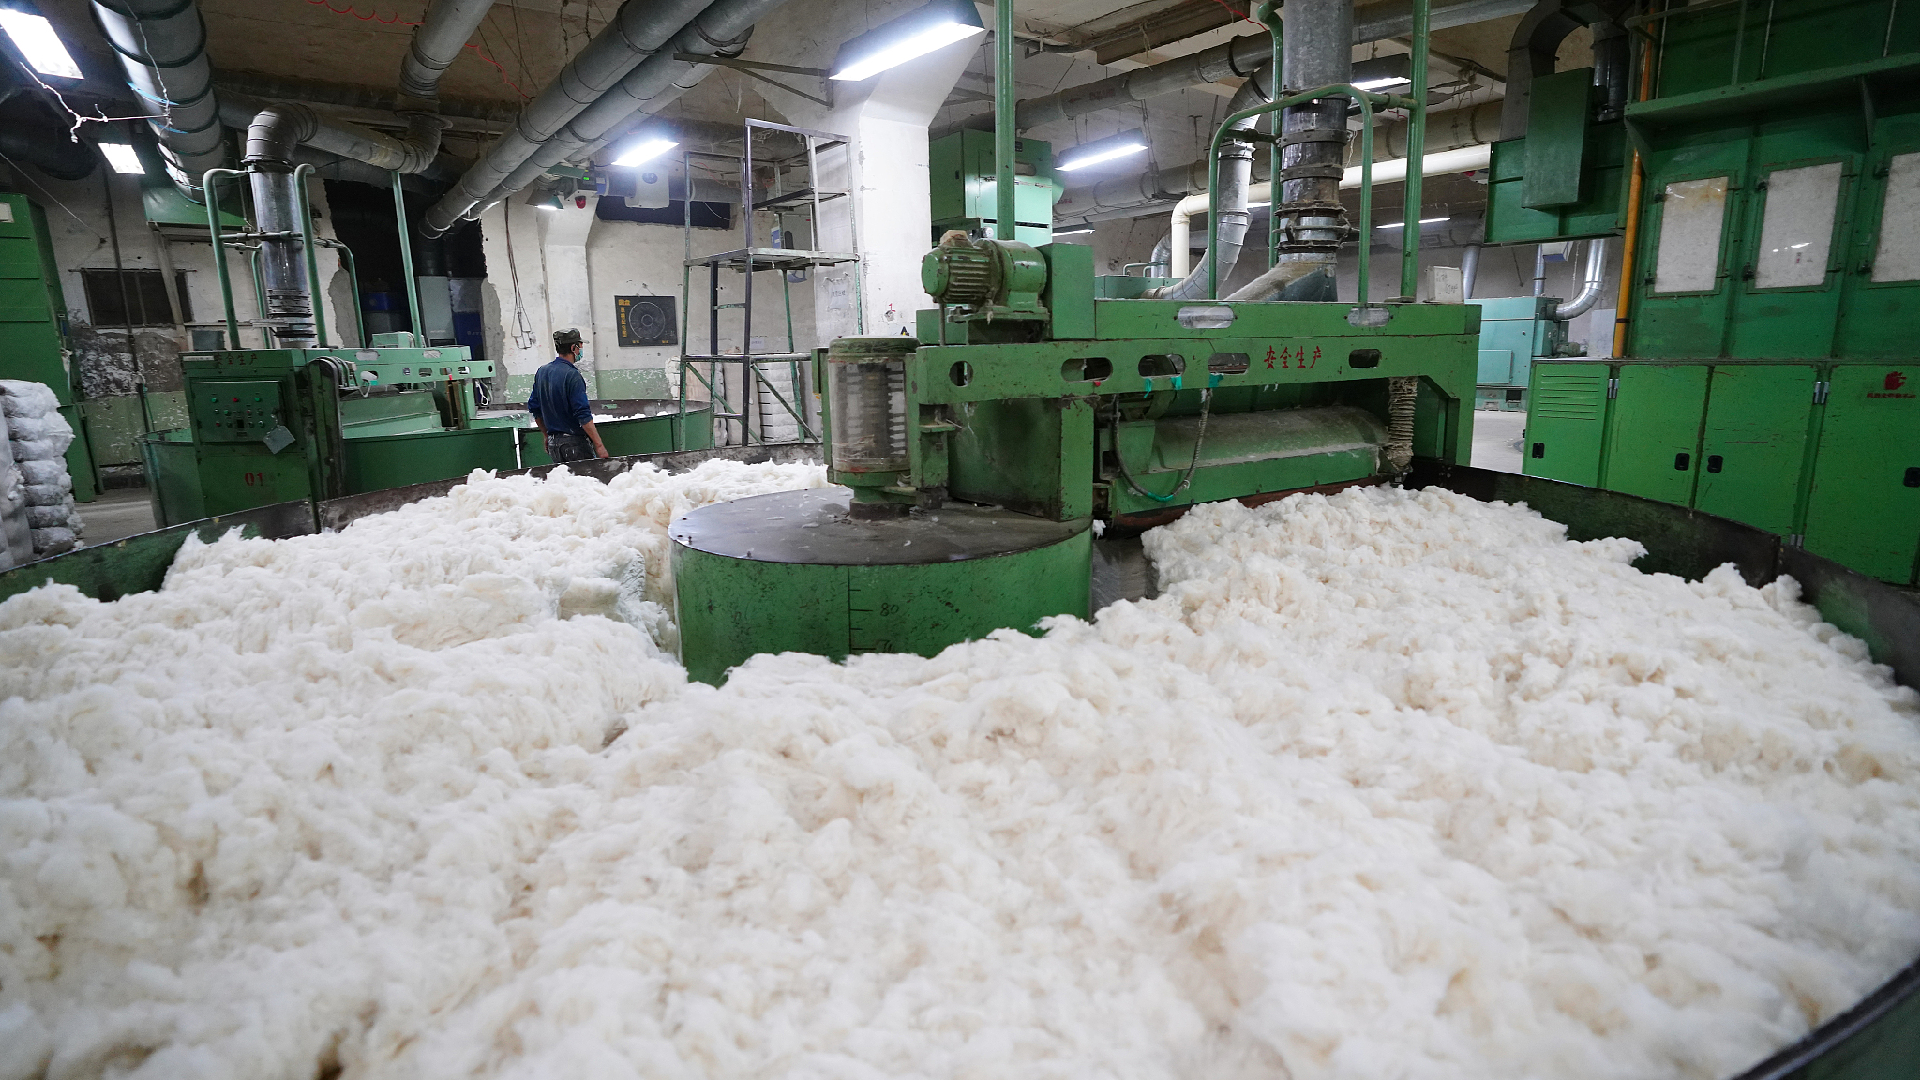 Turkmen Ministry of Textile extends tender for modernization of cotton-spinning factory